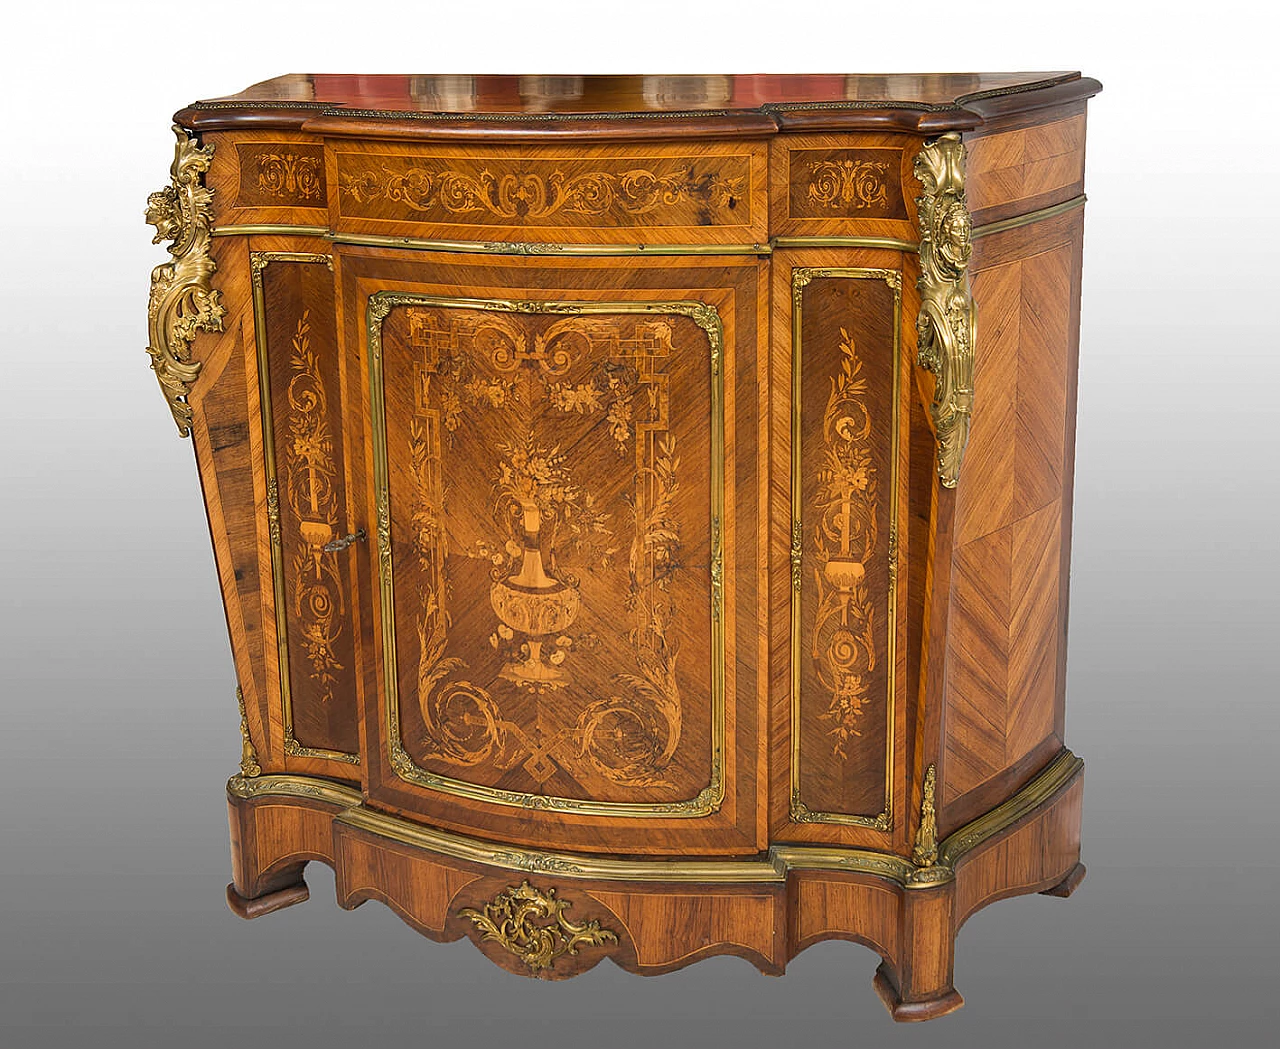 Napoleon III sideboard in exotic woods with gilded bronze fittings, 19th century 1